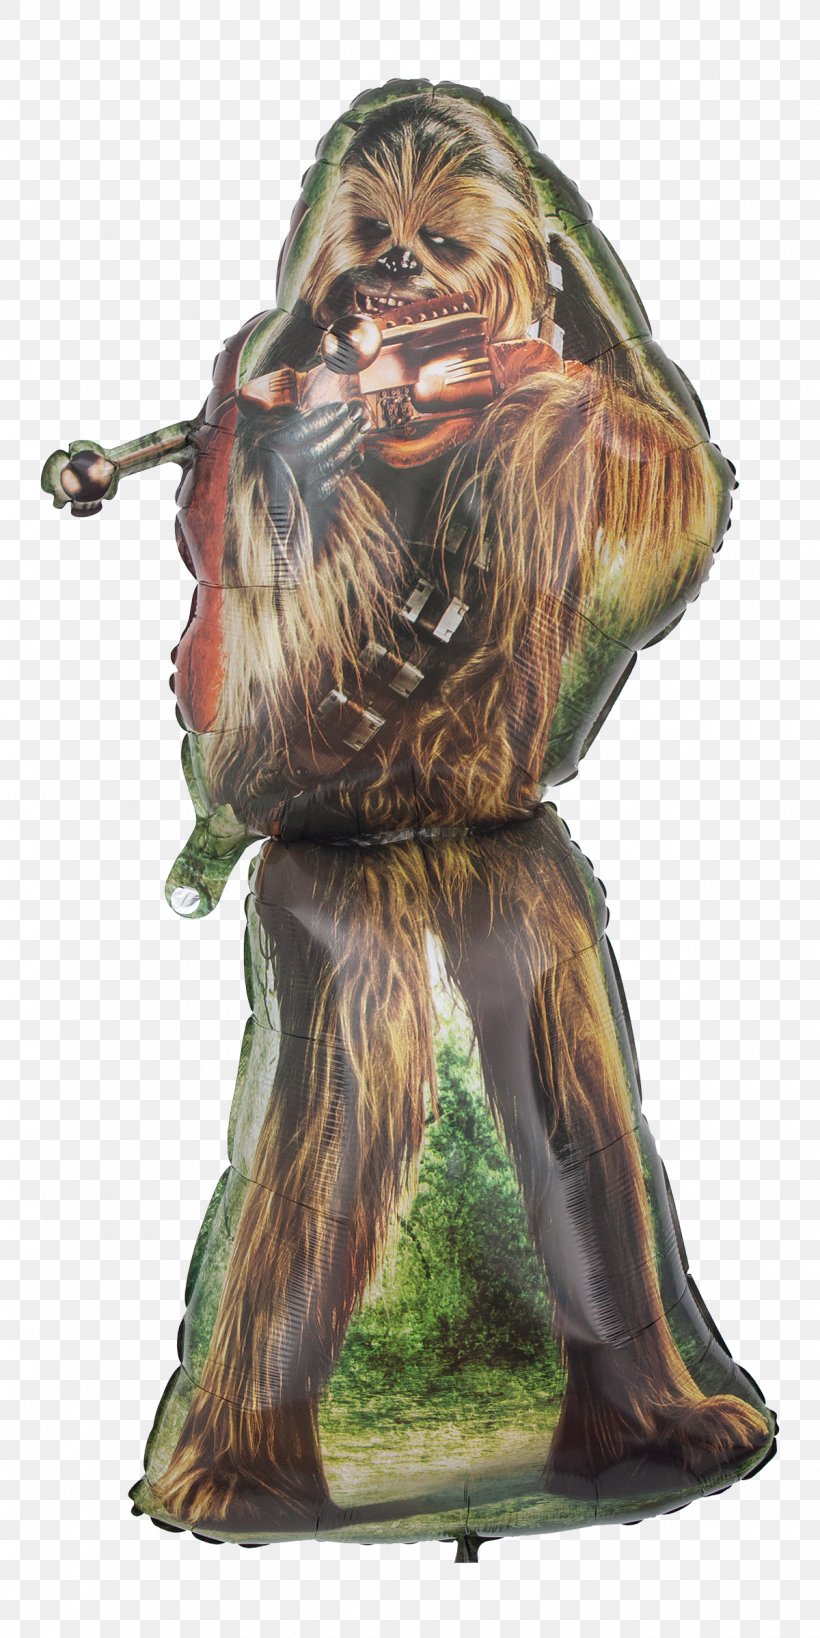 Chewbacca Toy Balloon Figurine Star Wars Foil, PNG, 1200x2398px, Chewbacca, Balloon, Dostawa, Fictional Character, Figurine Download Free